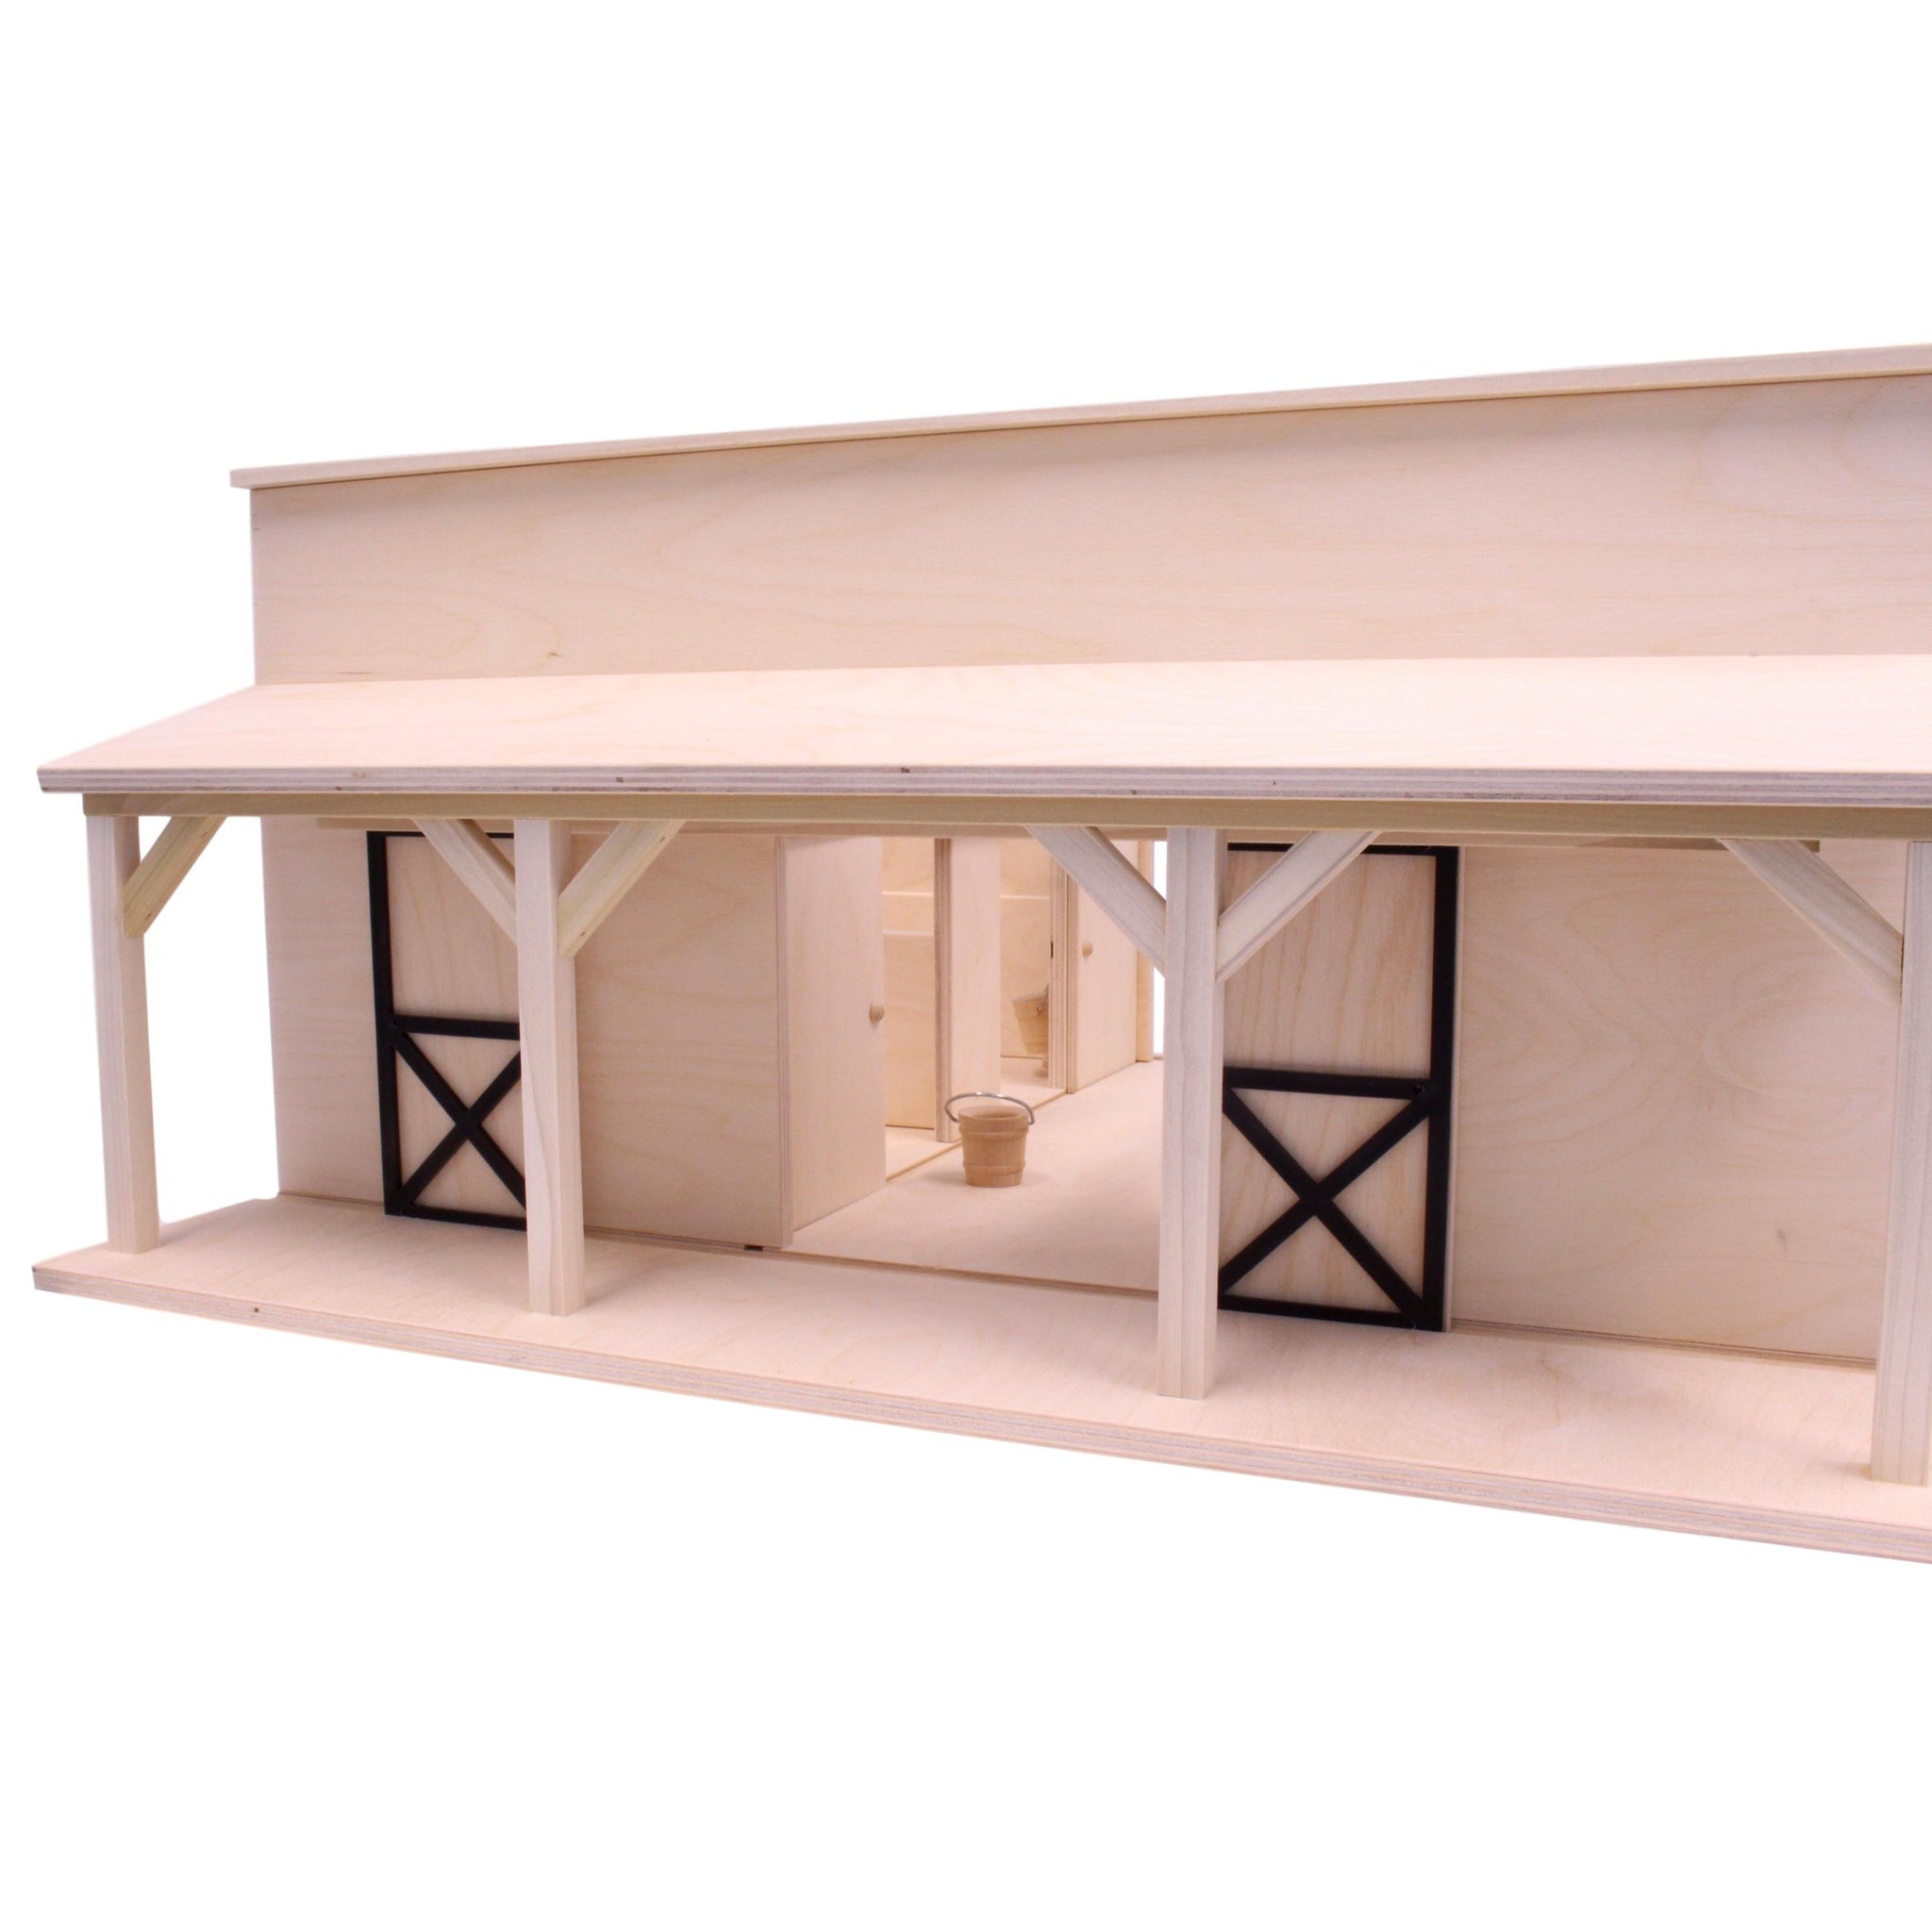 Large Wooden Western Horse Barn Toy